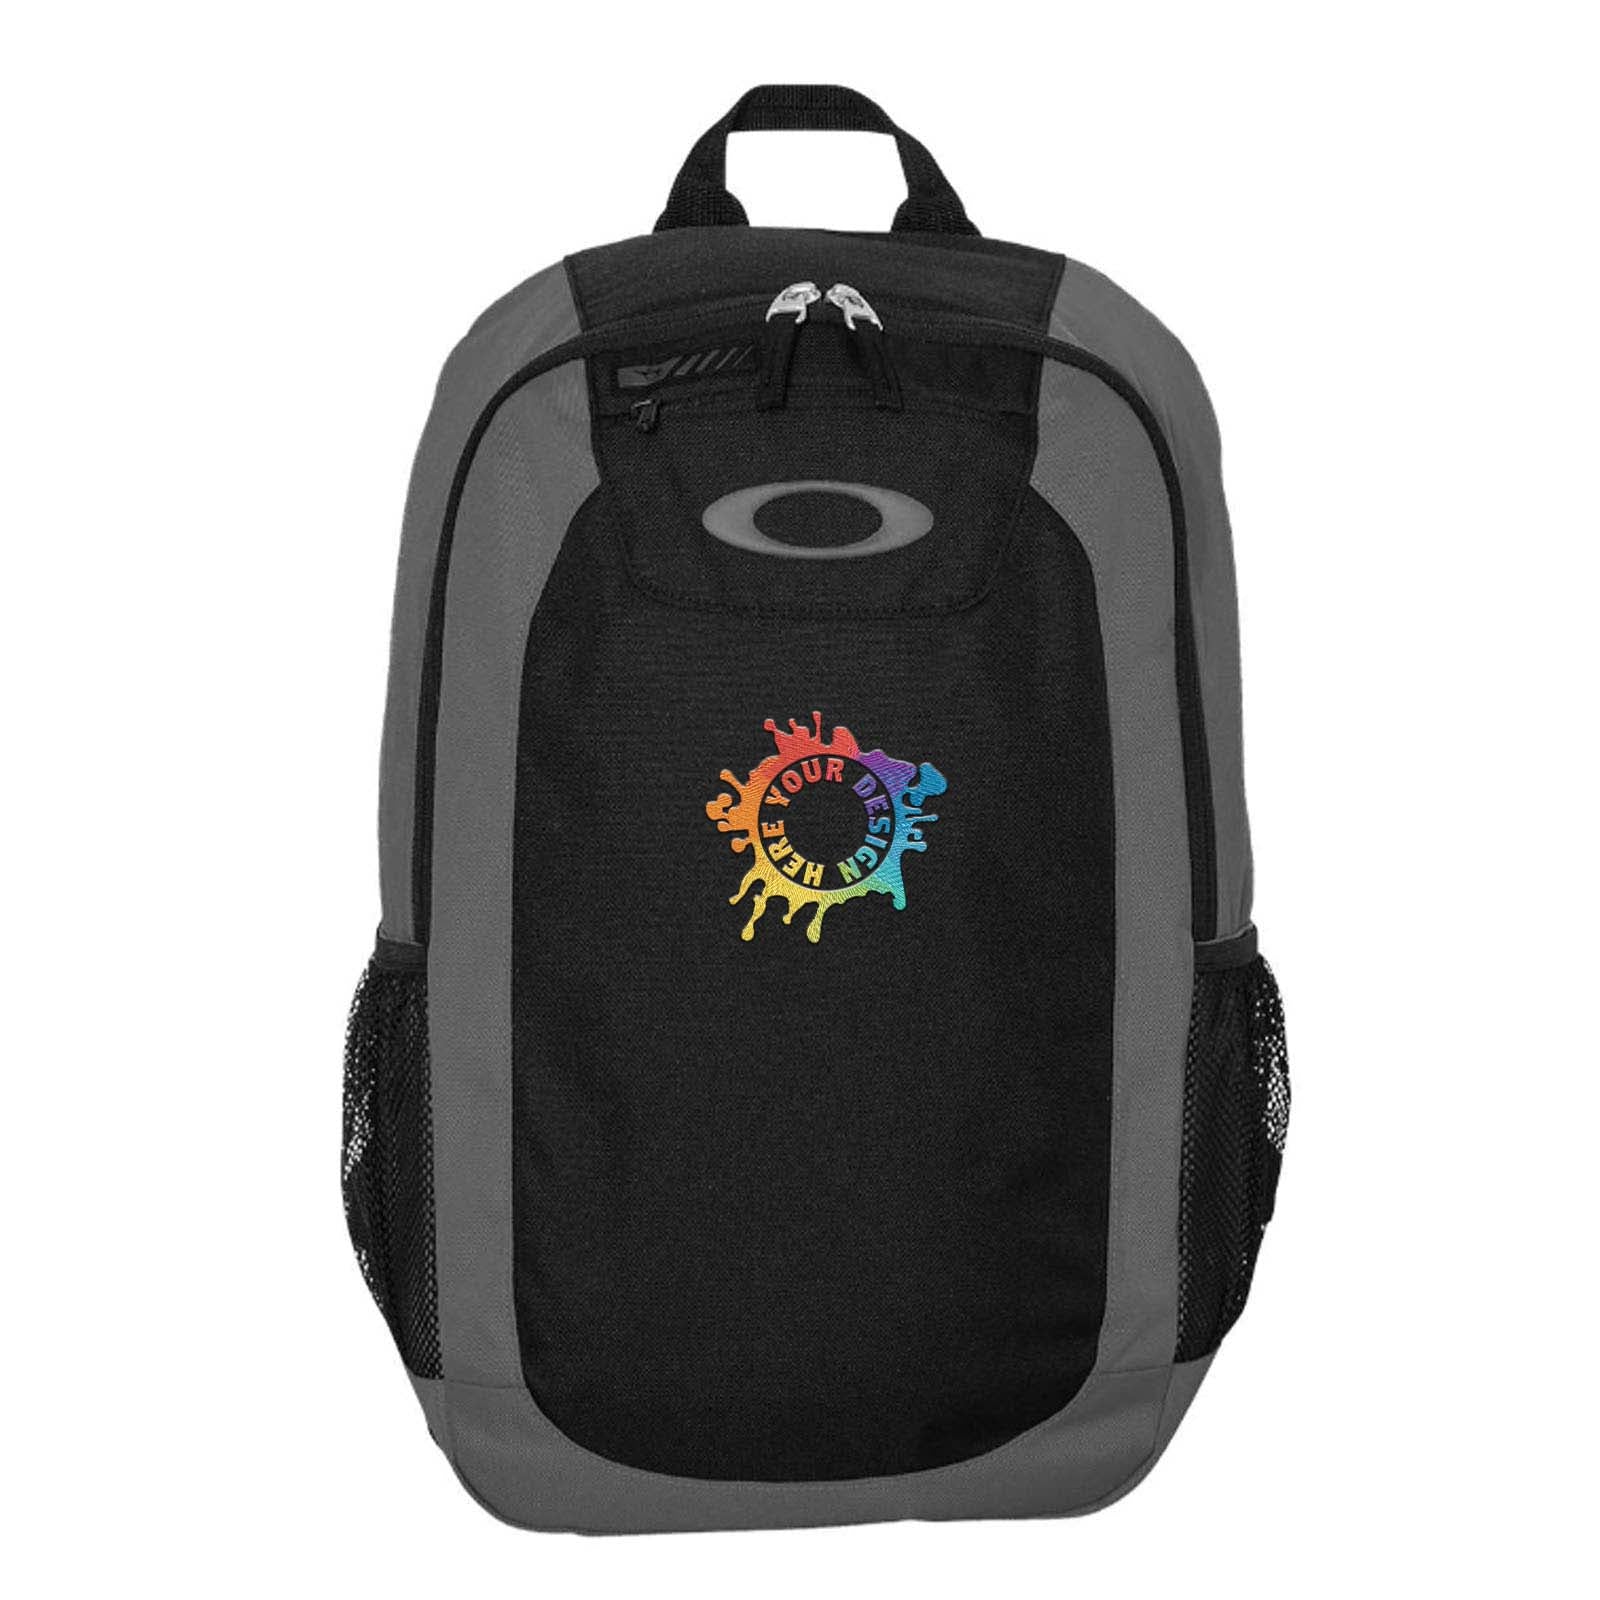 Oakley 20L Enduro Backpack Embroidery